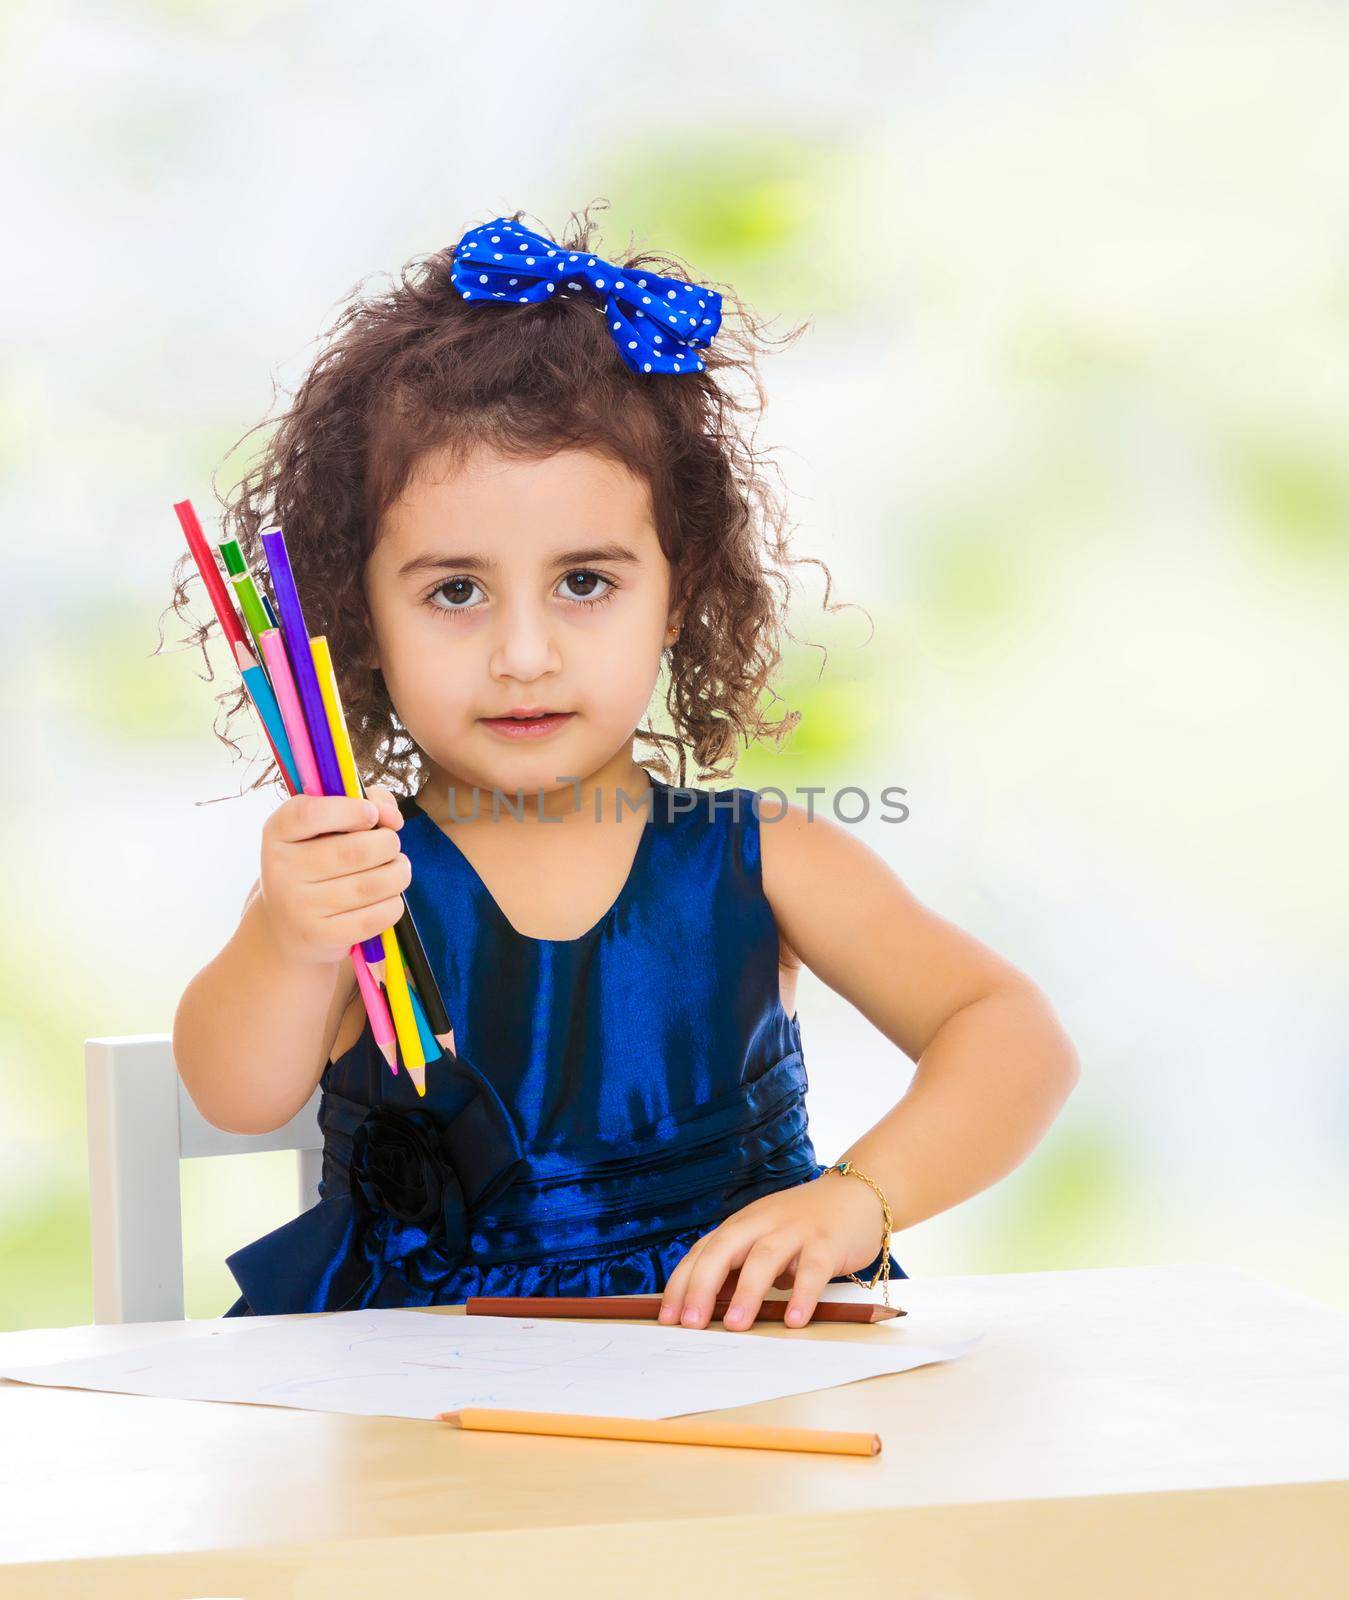 Cute little girl in blue dress, holds a lot of pencils . She paints at a table in a Montessori kindergarten.white-green blurred abstract background with snowflakes.